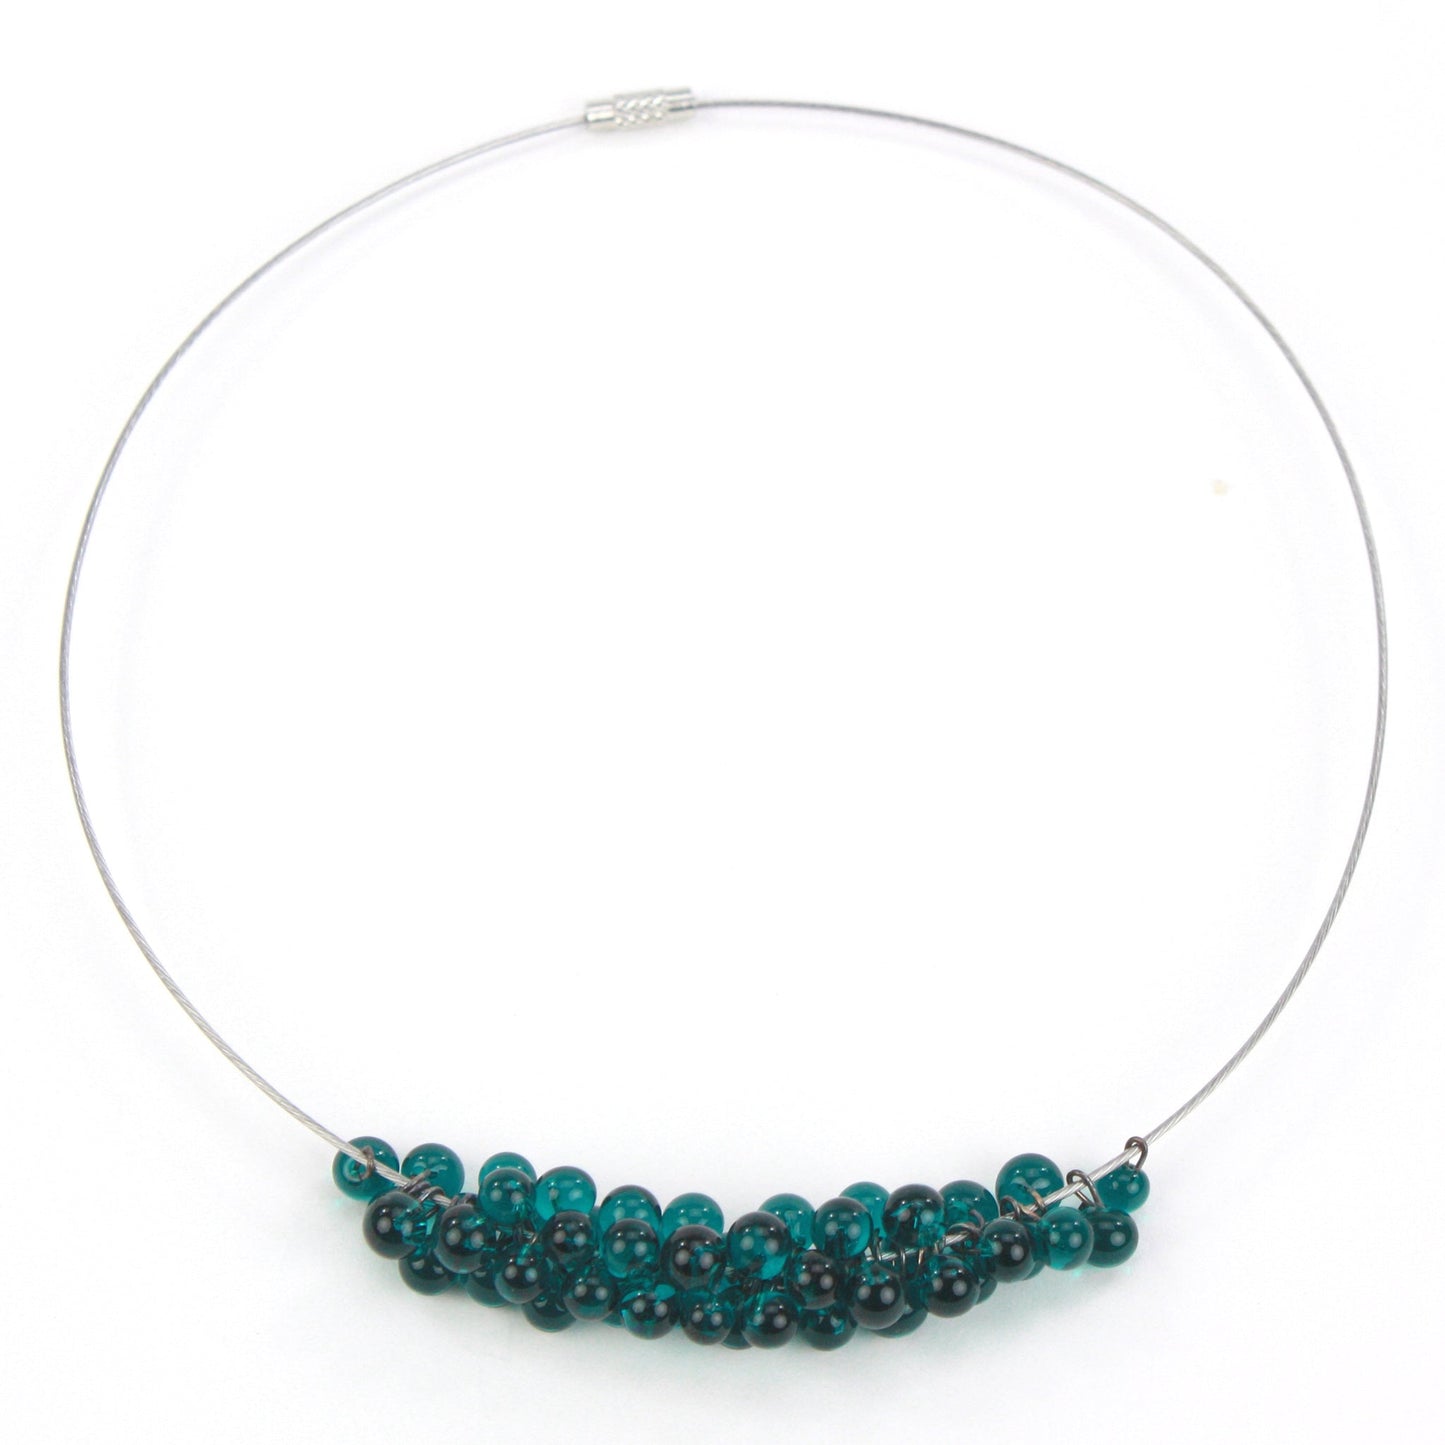 Petite Chroma Necklace in Teal